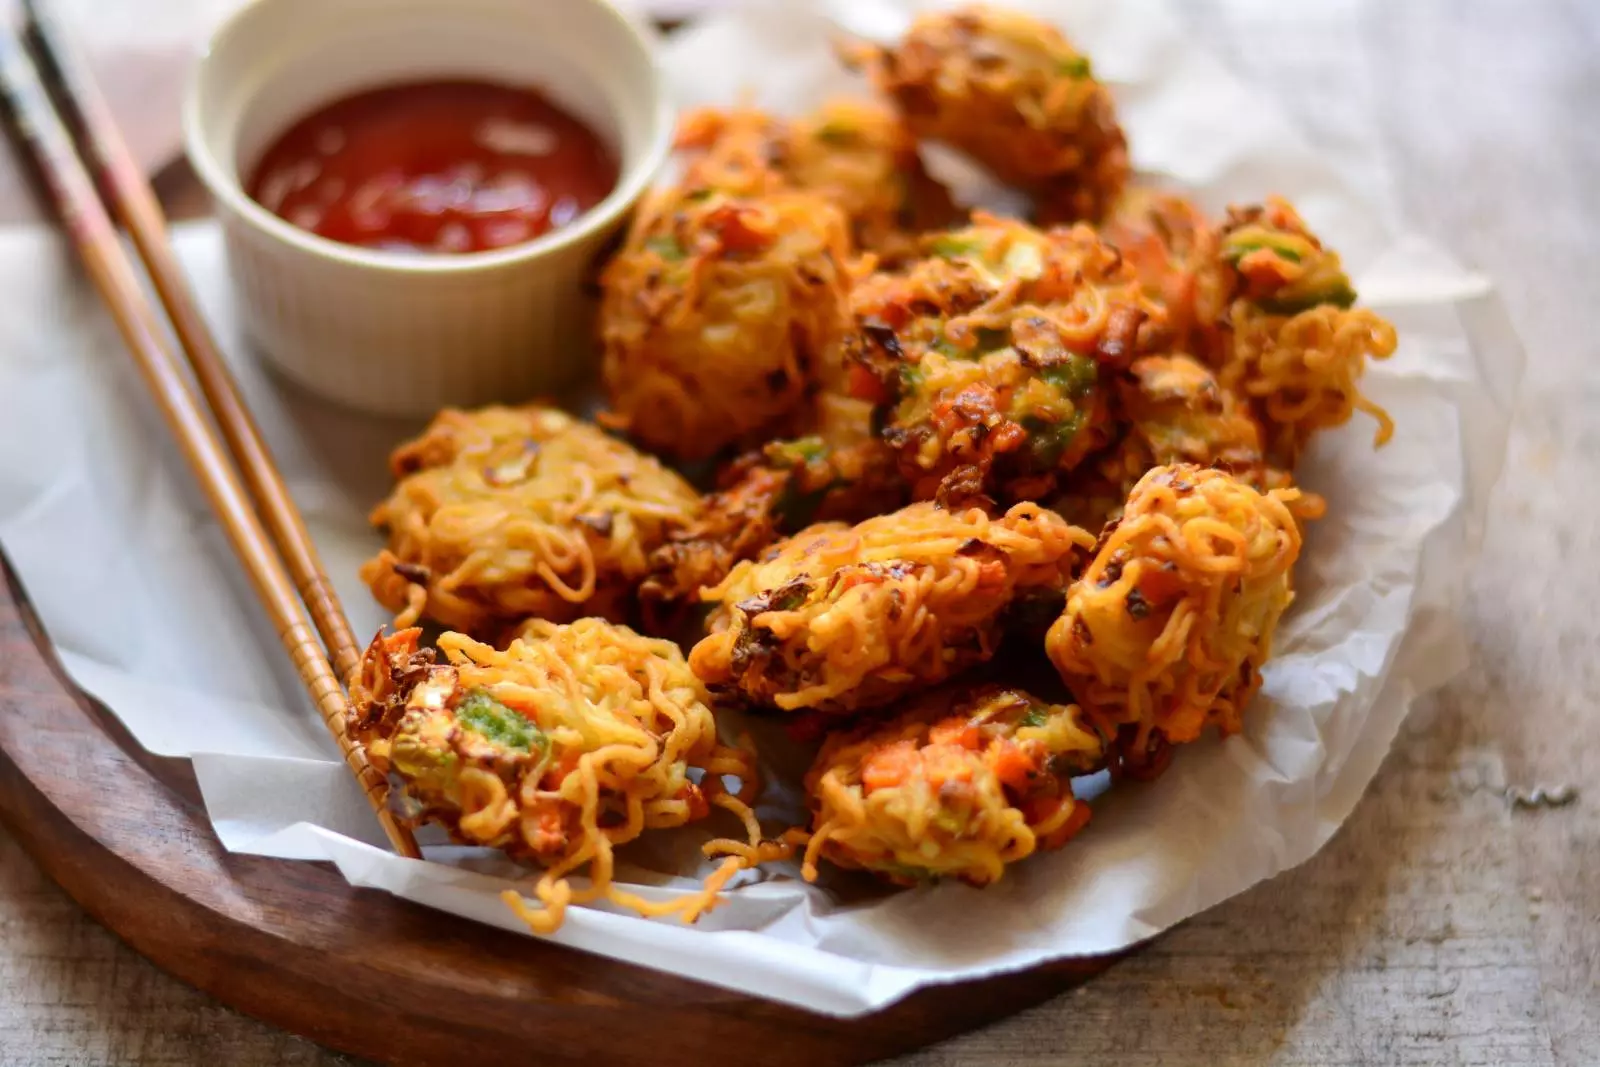 A mouth watering snack made out of our fav noodles-Maggi pakoda